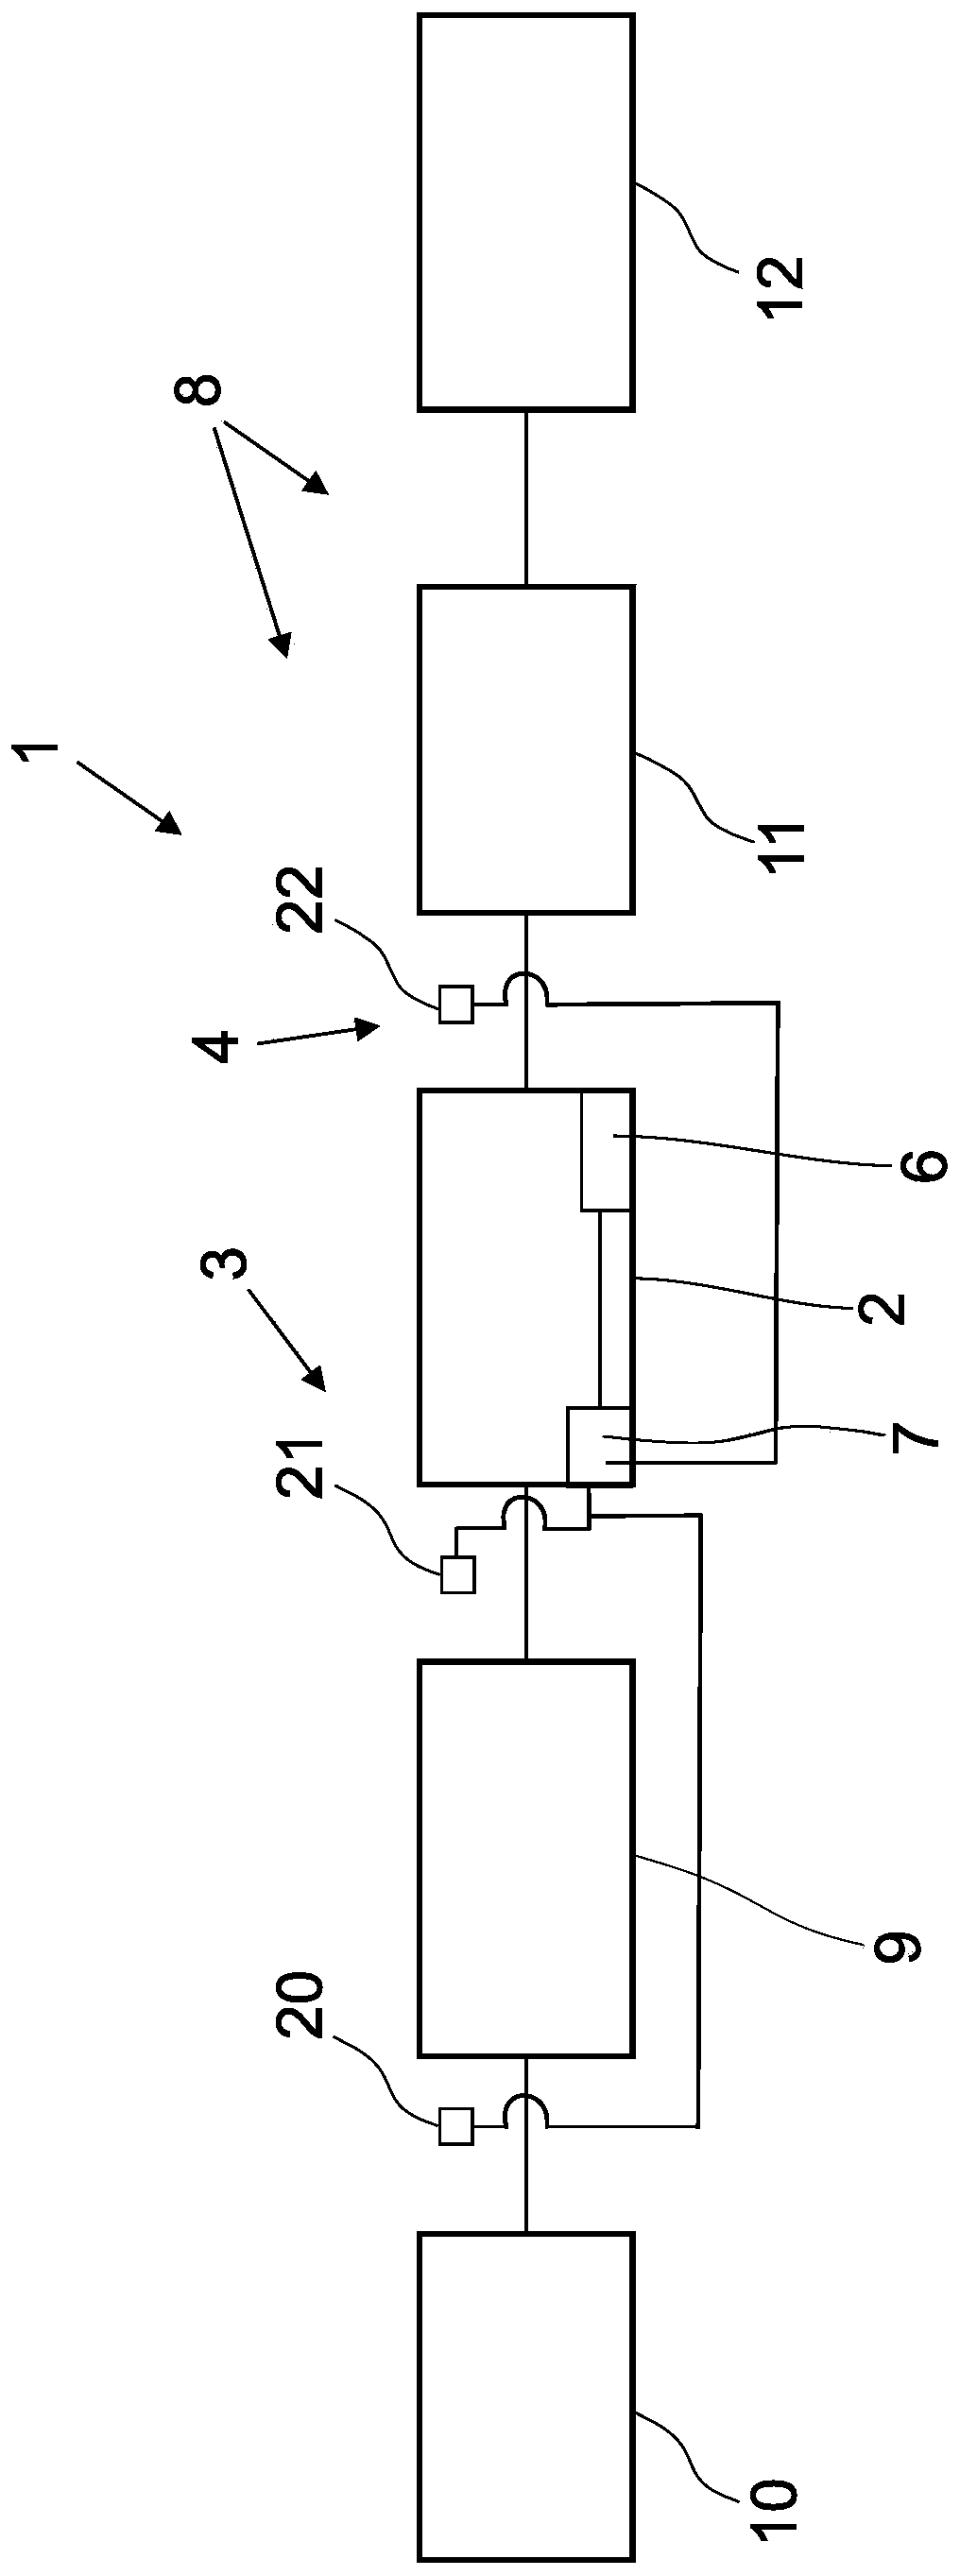 Damping arrangement for dampening rotational irregularities in drive train of motor vehicle and method therefor